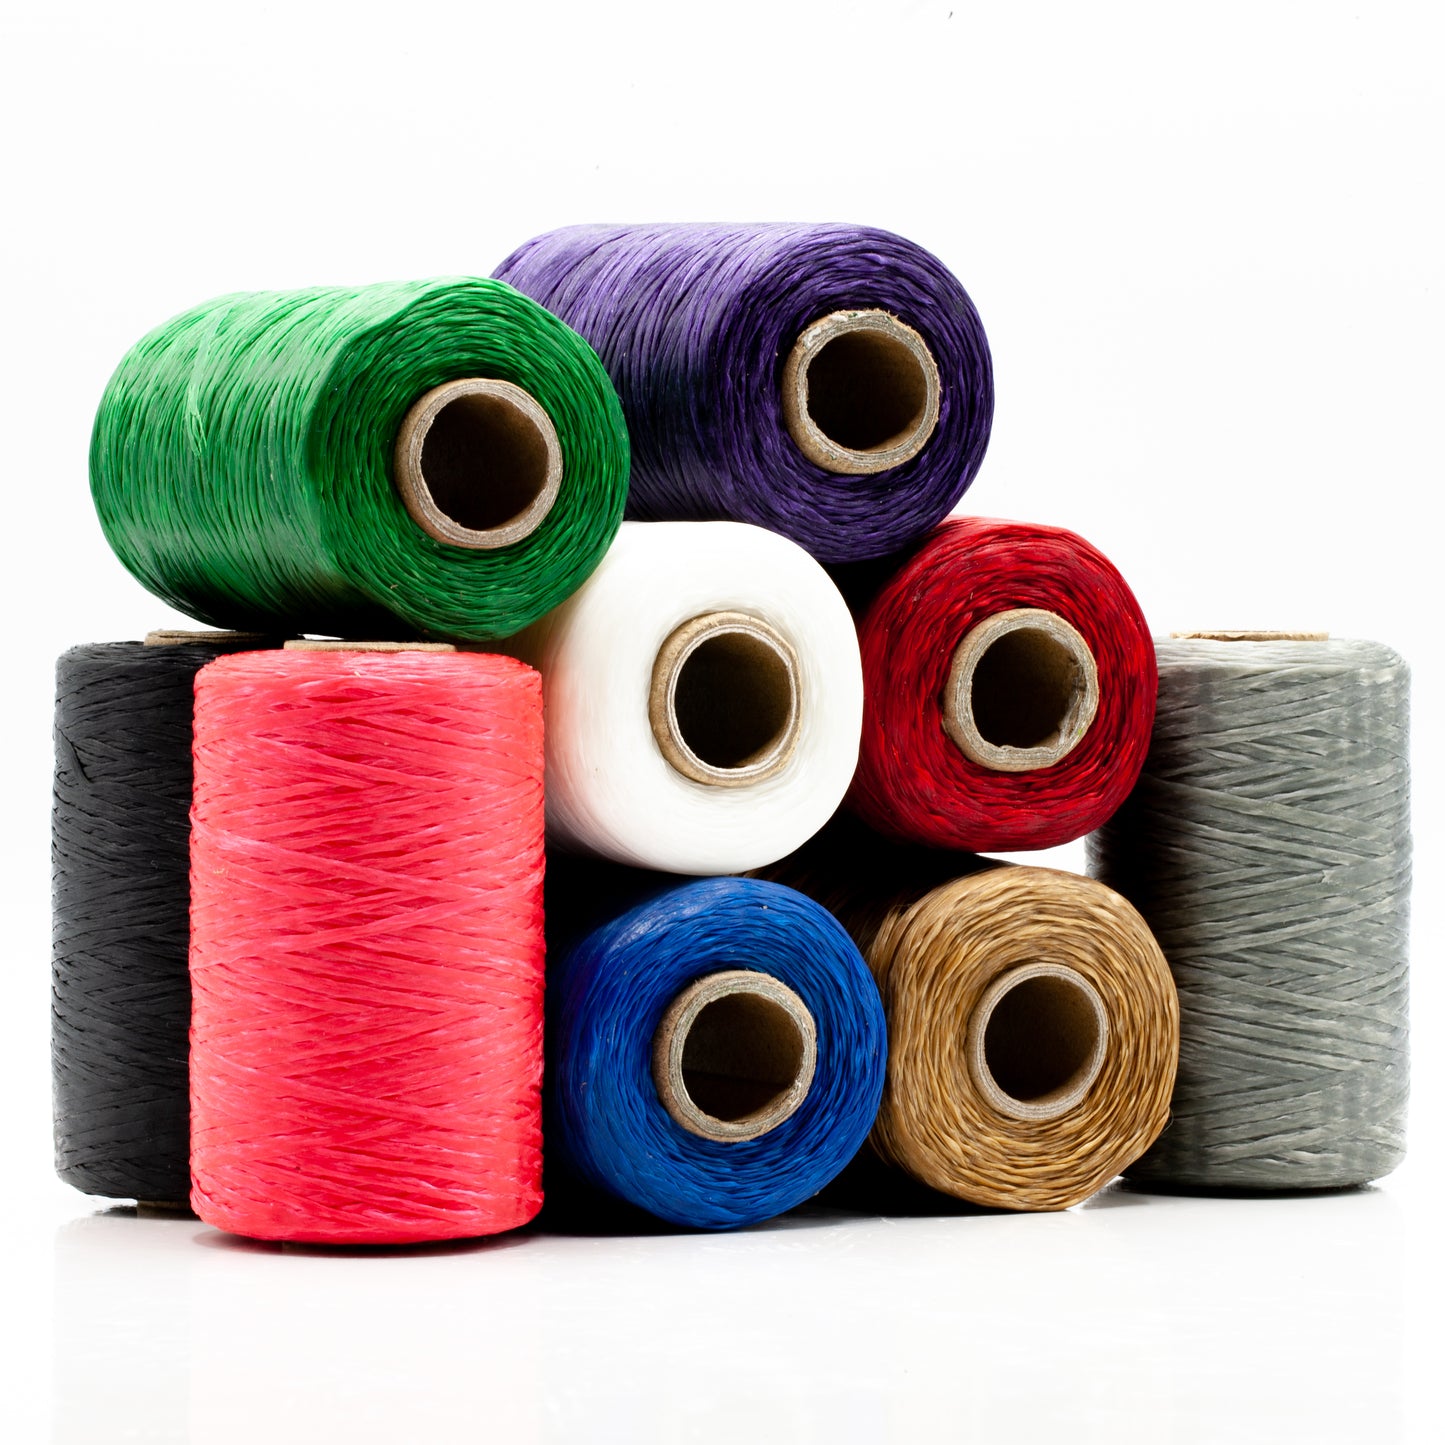 Artificial Sinew Thread - black, blue, green, grey, natural (brown), pink, purple, red and white